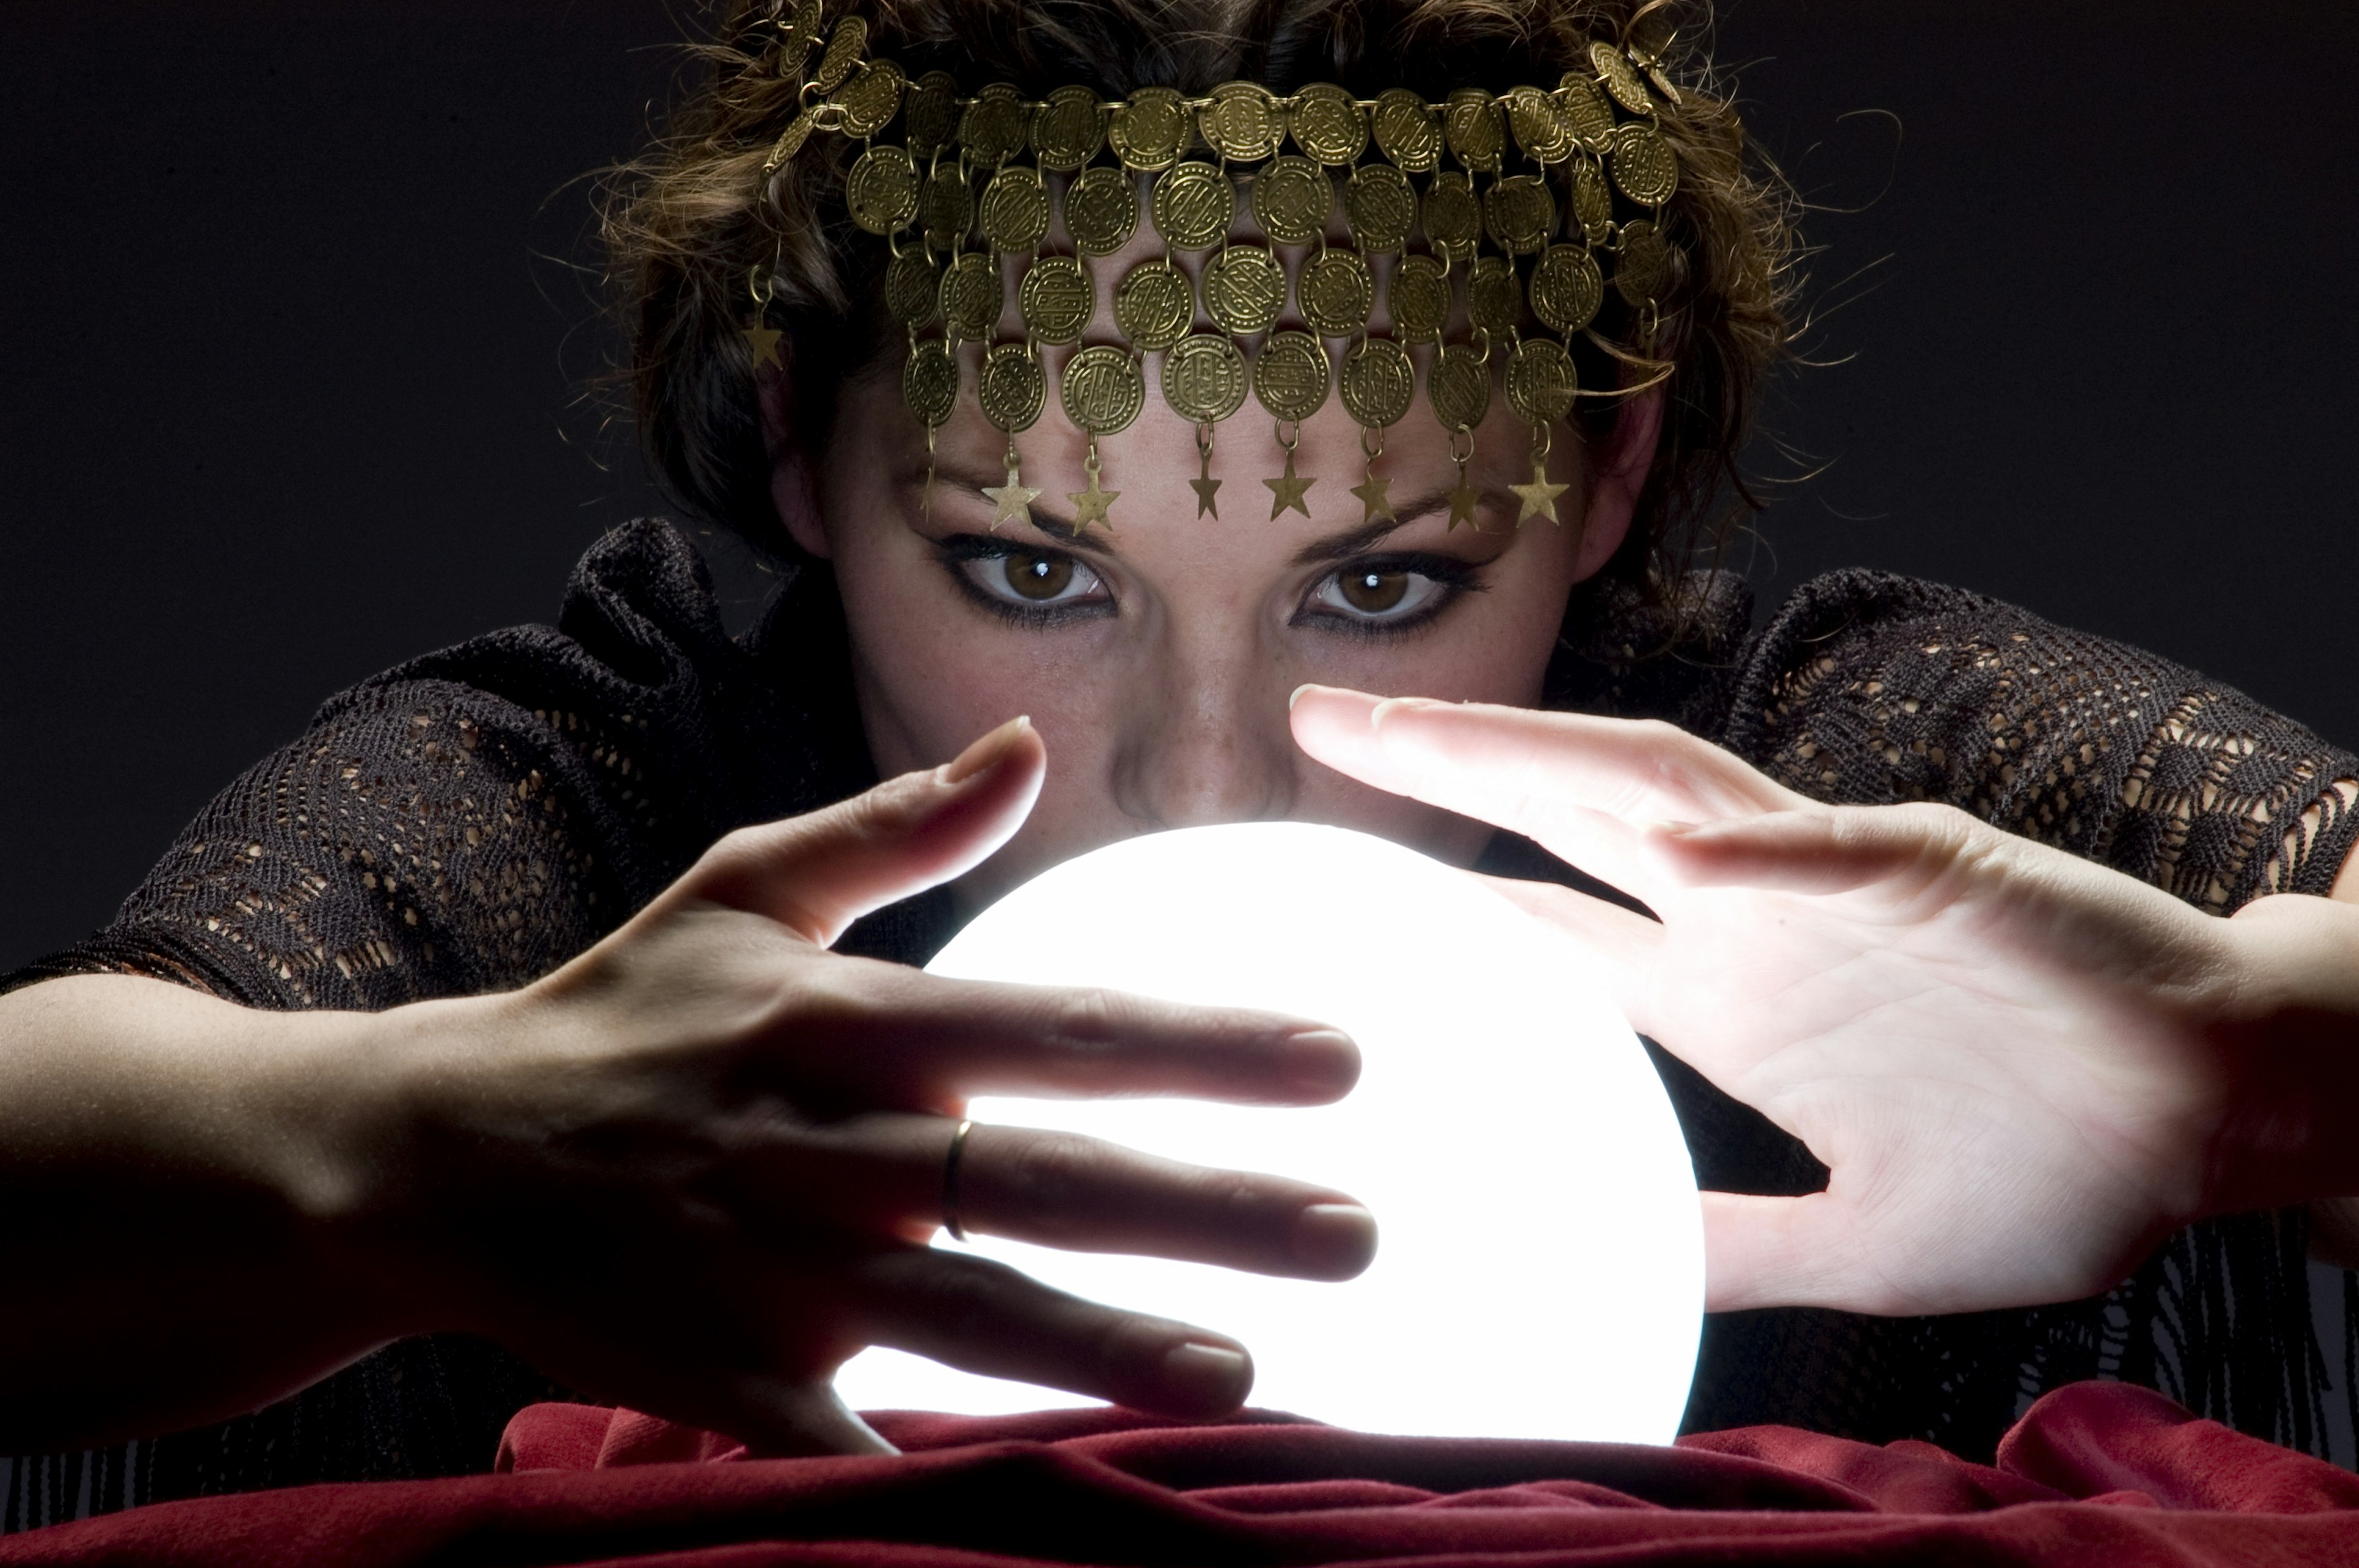 fortune teller hovering over glowing ball.